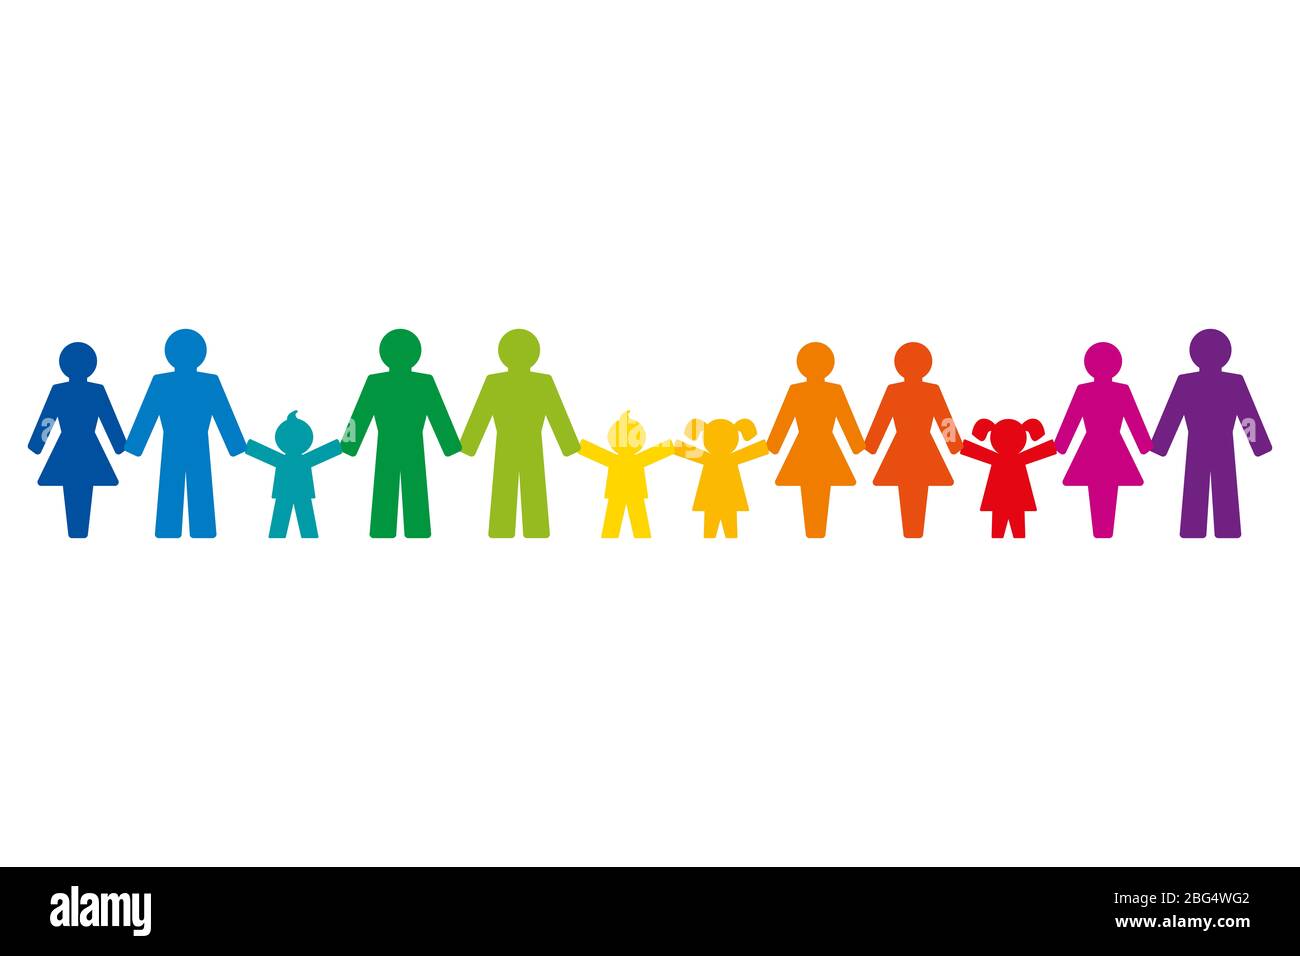 Rainbow colored pictograms of people holding hands, standing in a row. Abstract symbols of connected people, expressing friendship, love and harmony. Stock Photo